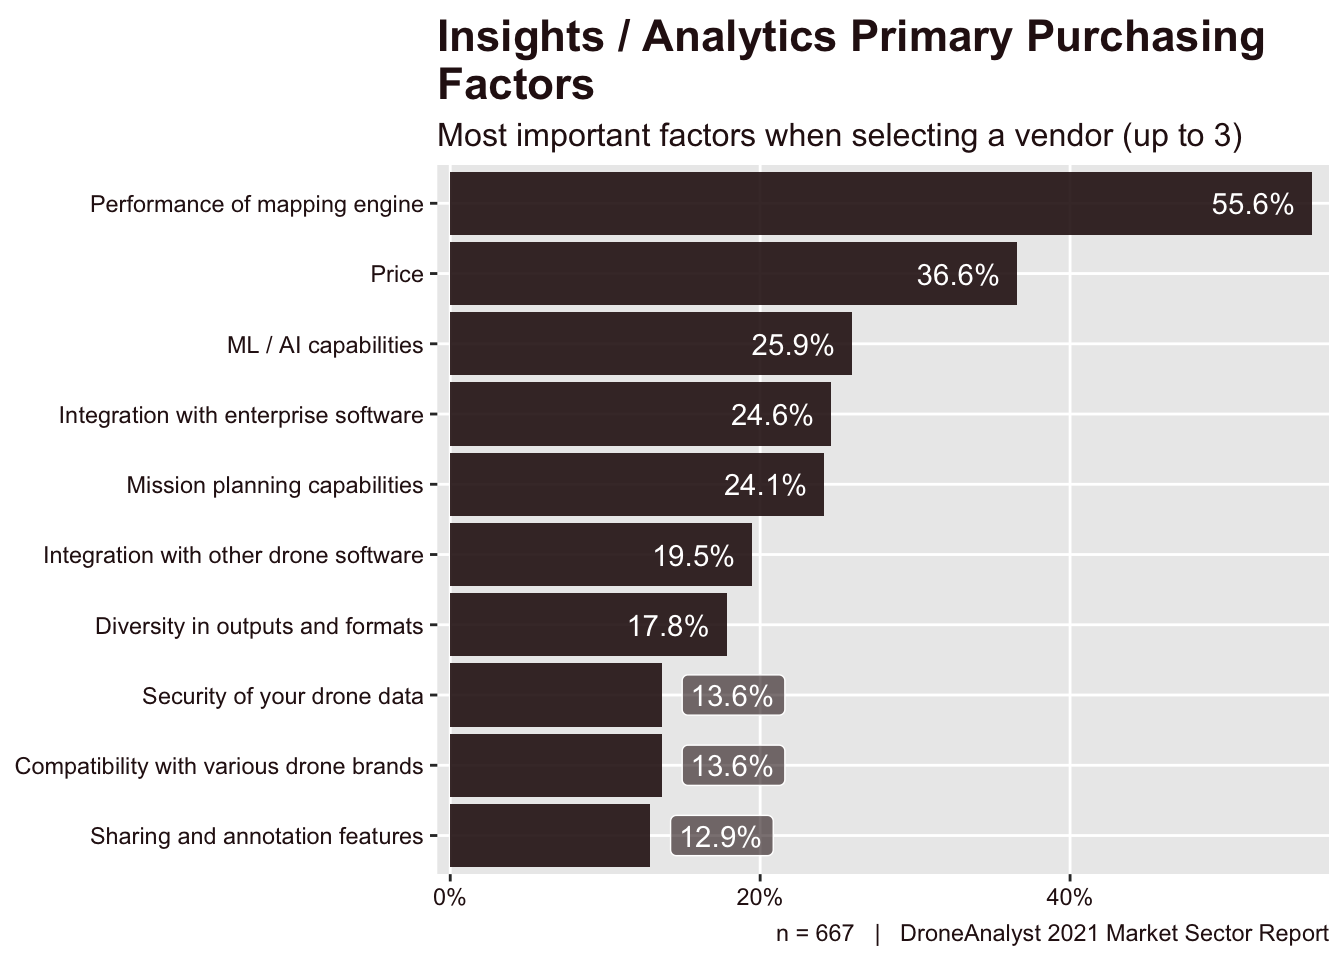 Insights / Analytics Primary Purchasing Factors